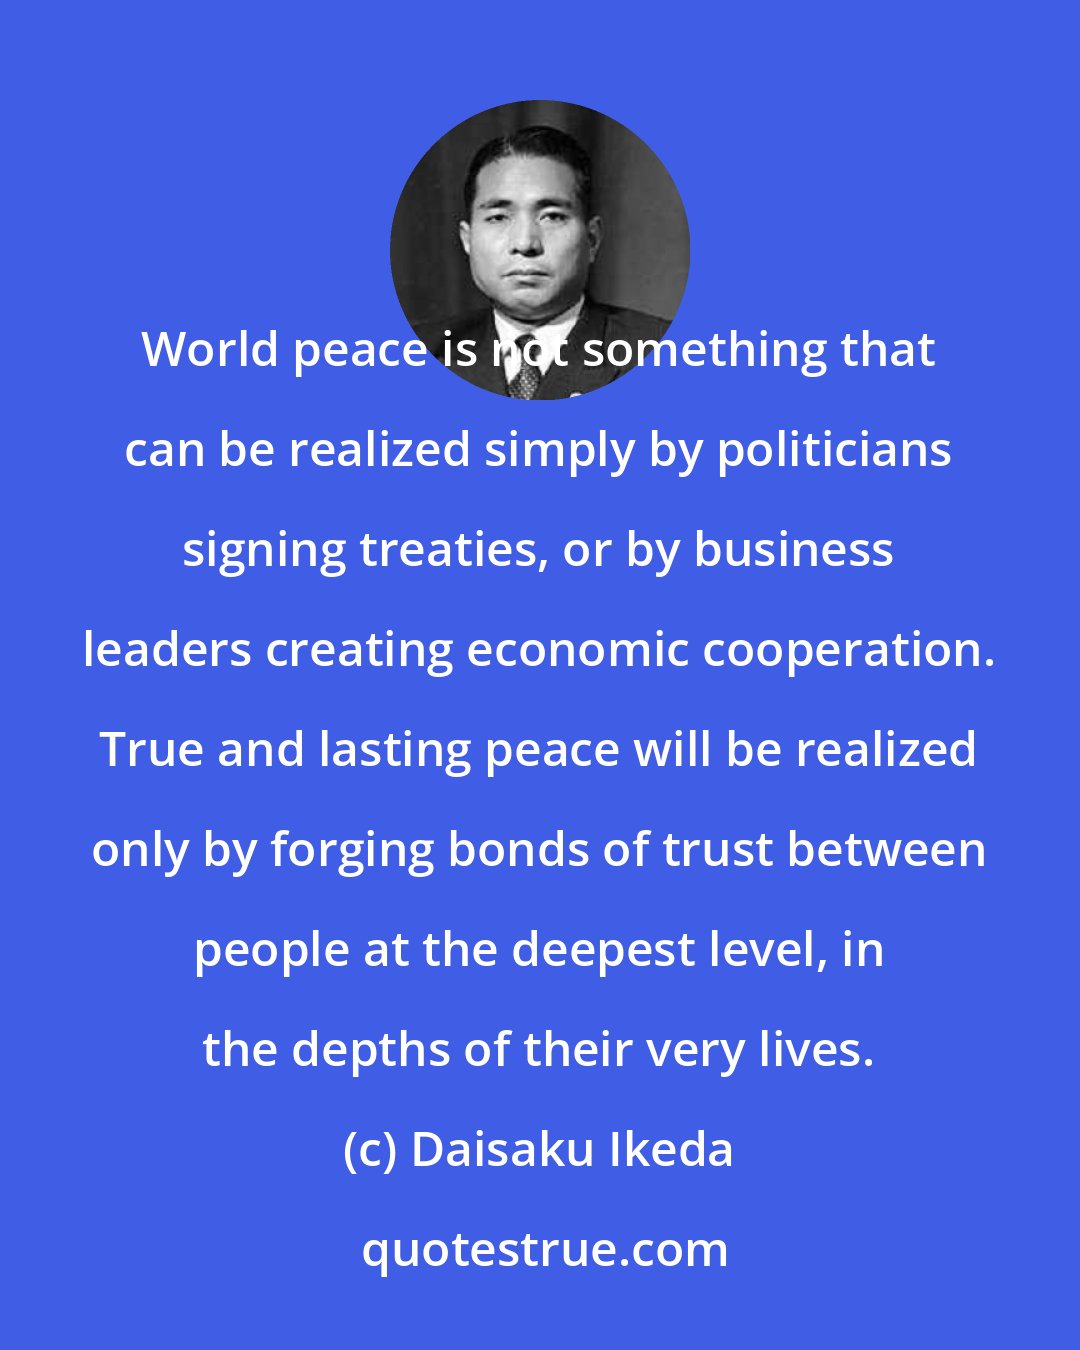 Daisaku Ikeda: World peace is not something that can be realized simply by politicians signing treaties, or by business leaders creating economic cooperation. True and lasting peace will be realized only by forging bonds of trust between people at the deepest level, in the depths of their very lives.